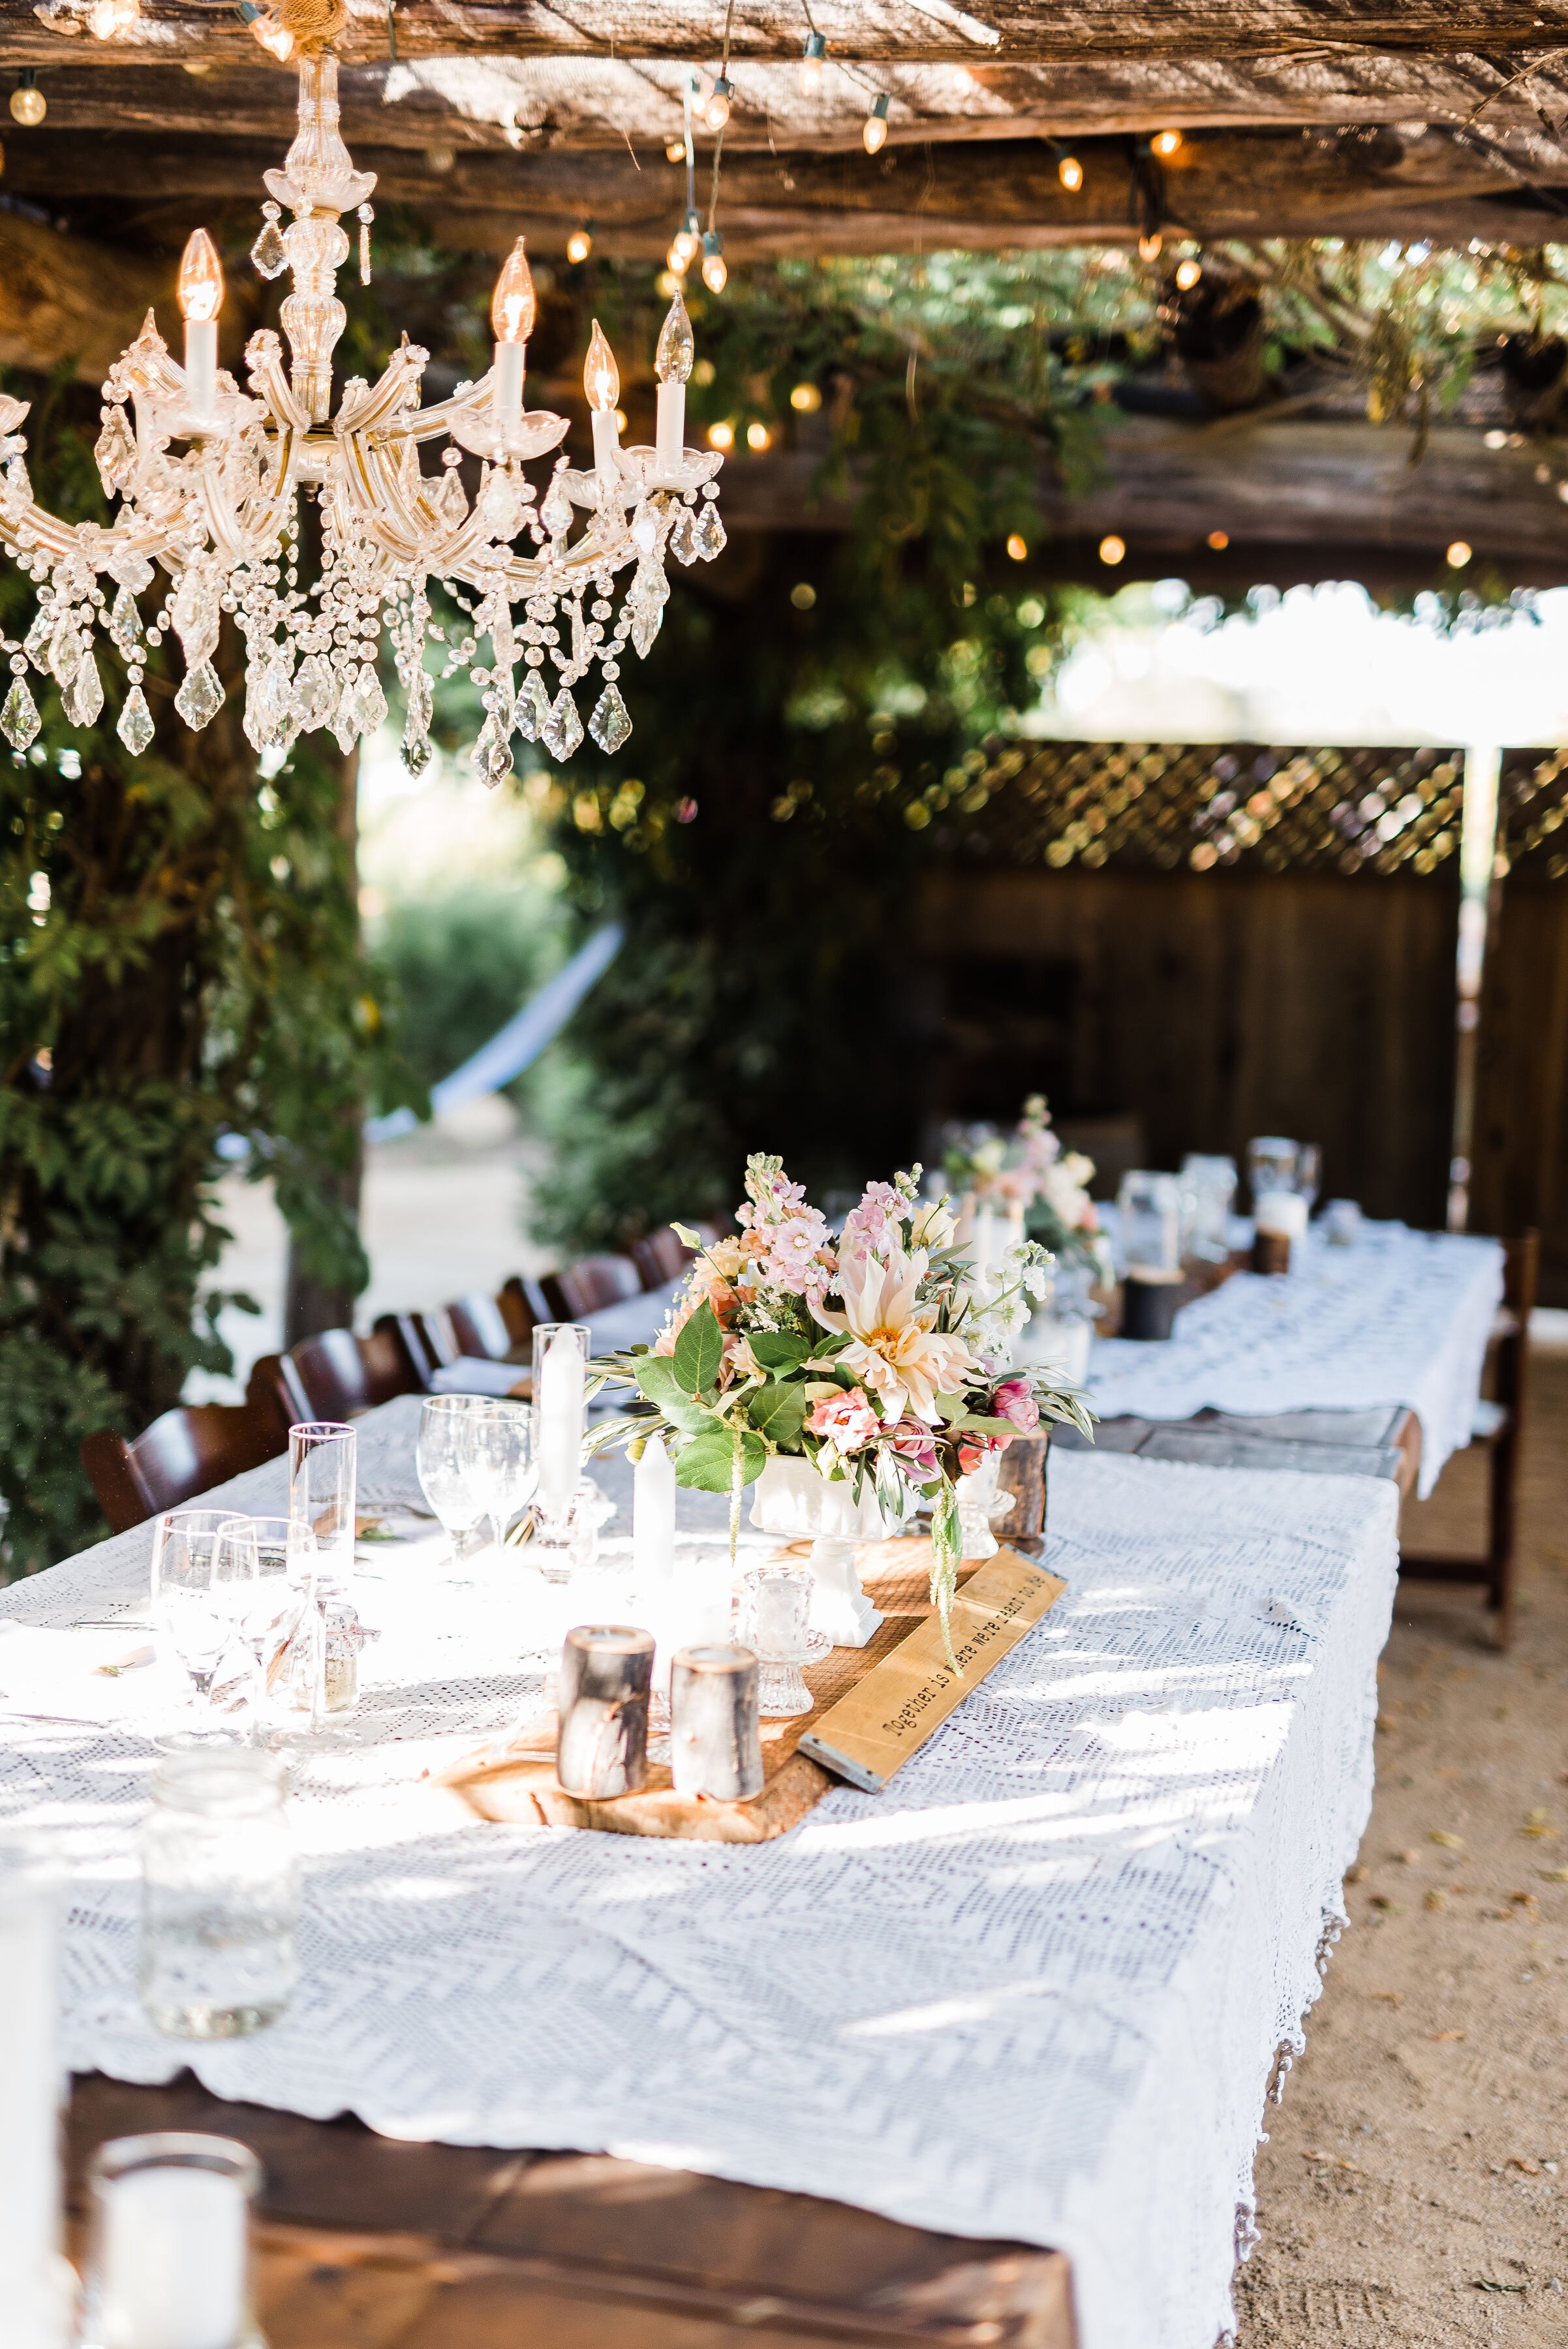 www.santabarbarawedding.com | Roblar Winery and Farm | Brittany Taylor Photography | Reception Table Set Up with Chandelier